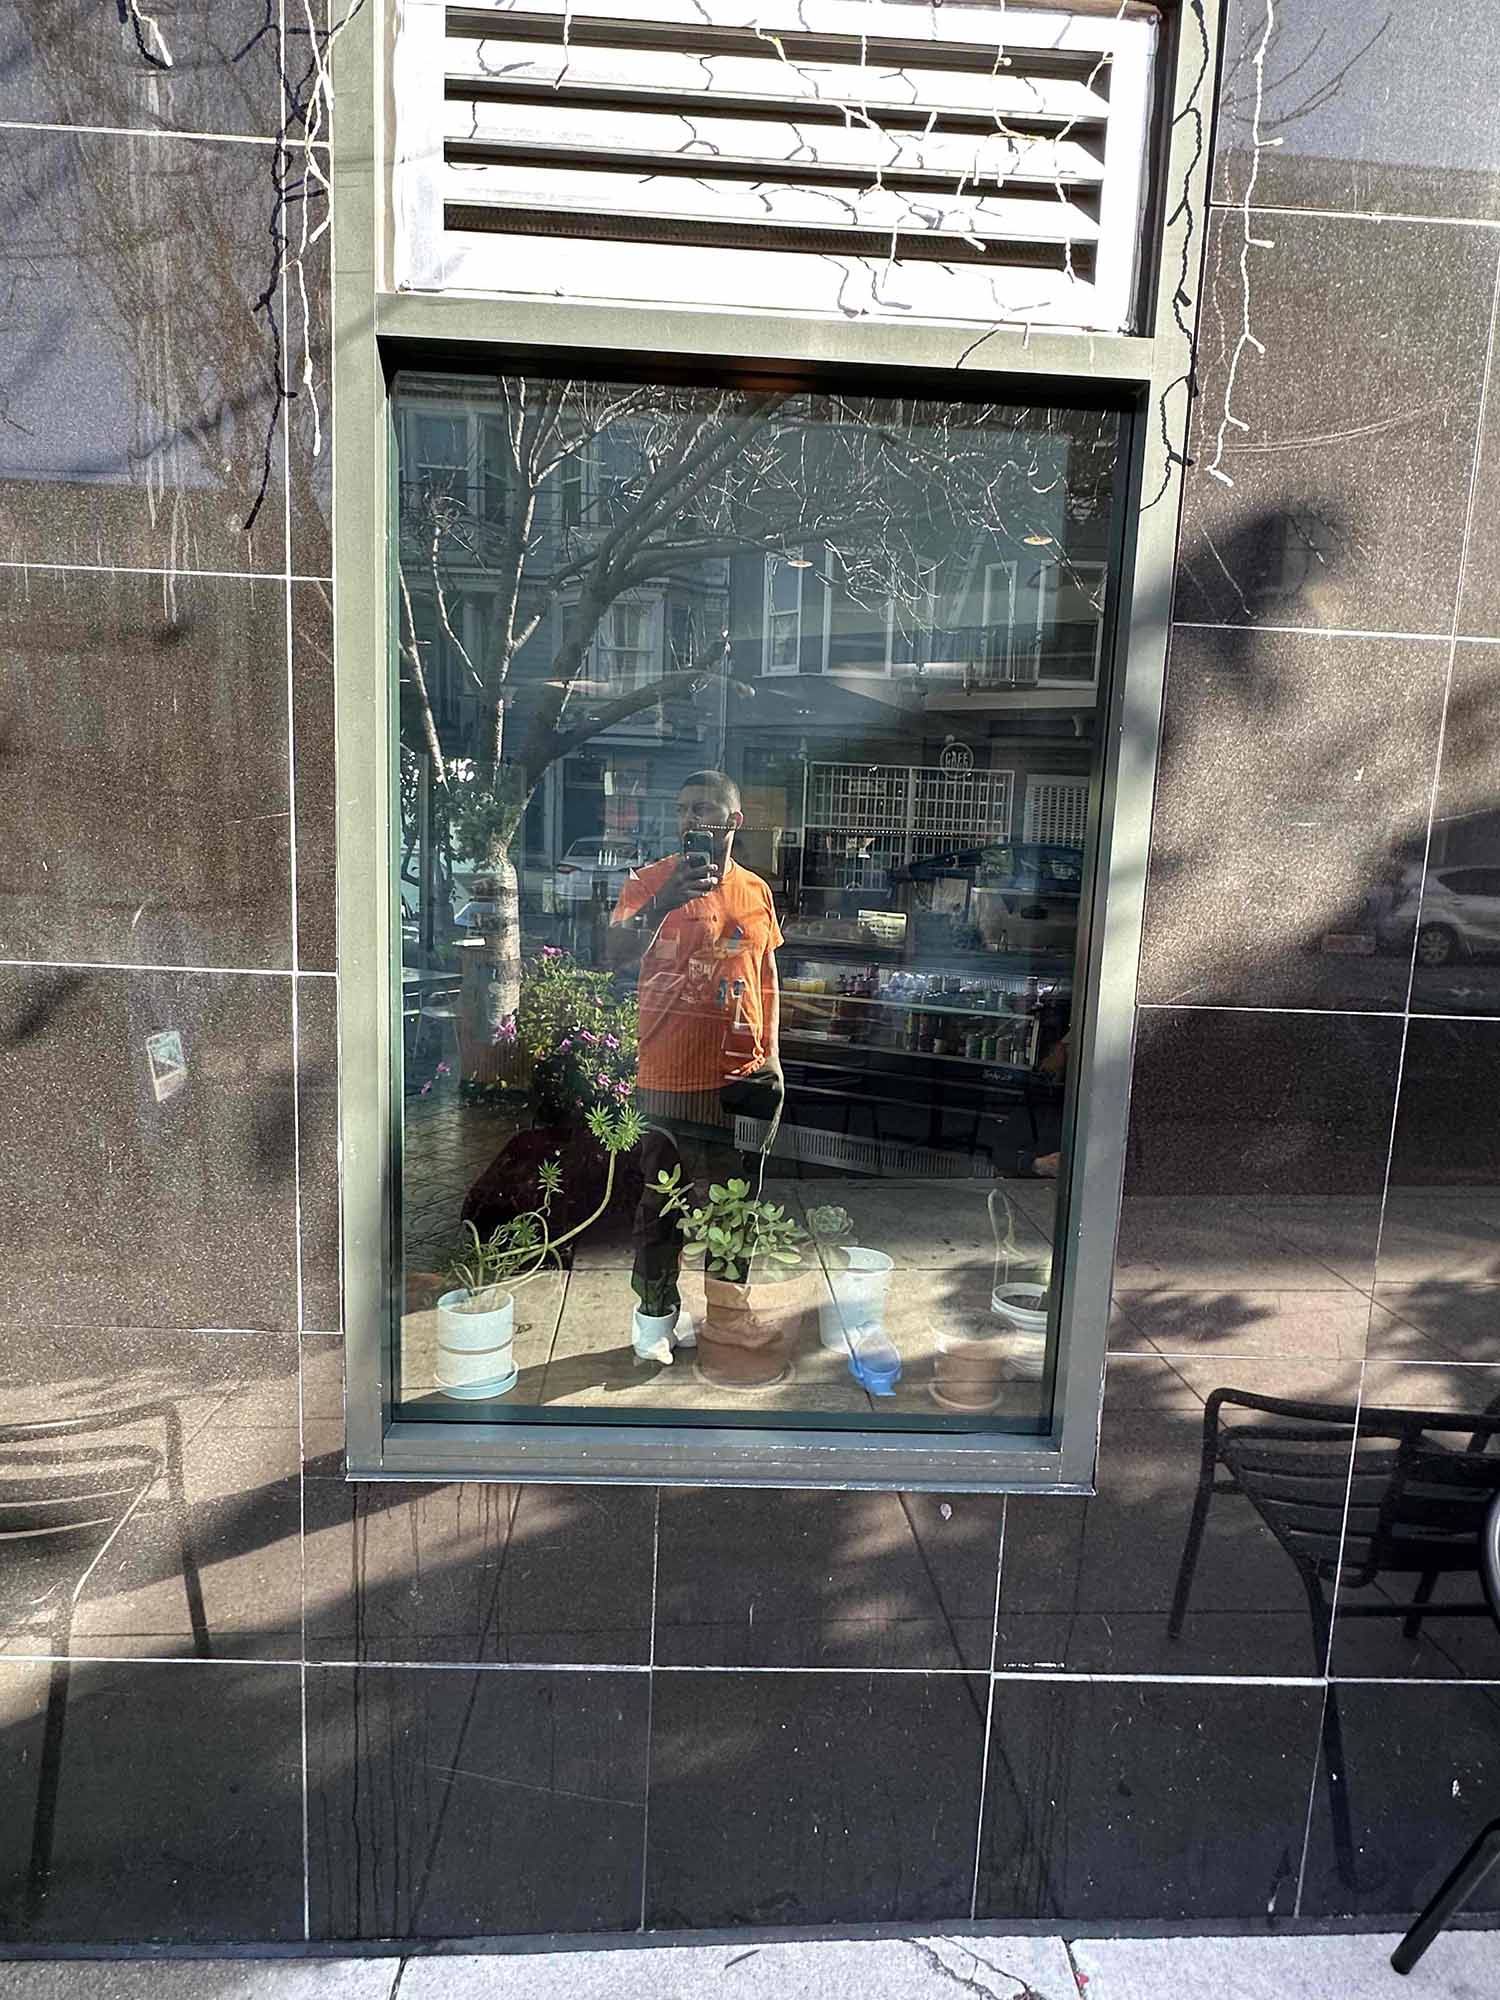 A San Francisco Cafe Gets 3M Security Window Film. Installed by ClimatePro, the Bay Area's best window film installation company.